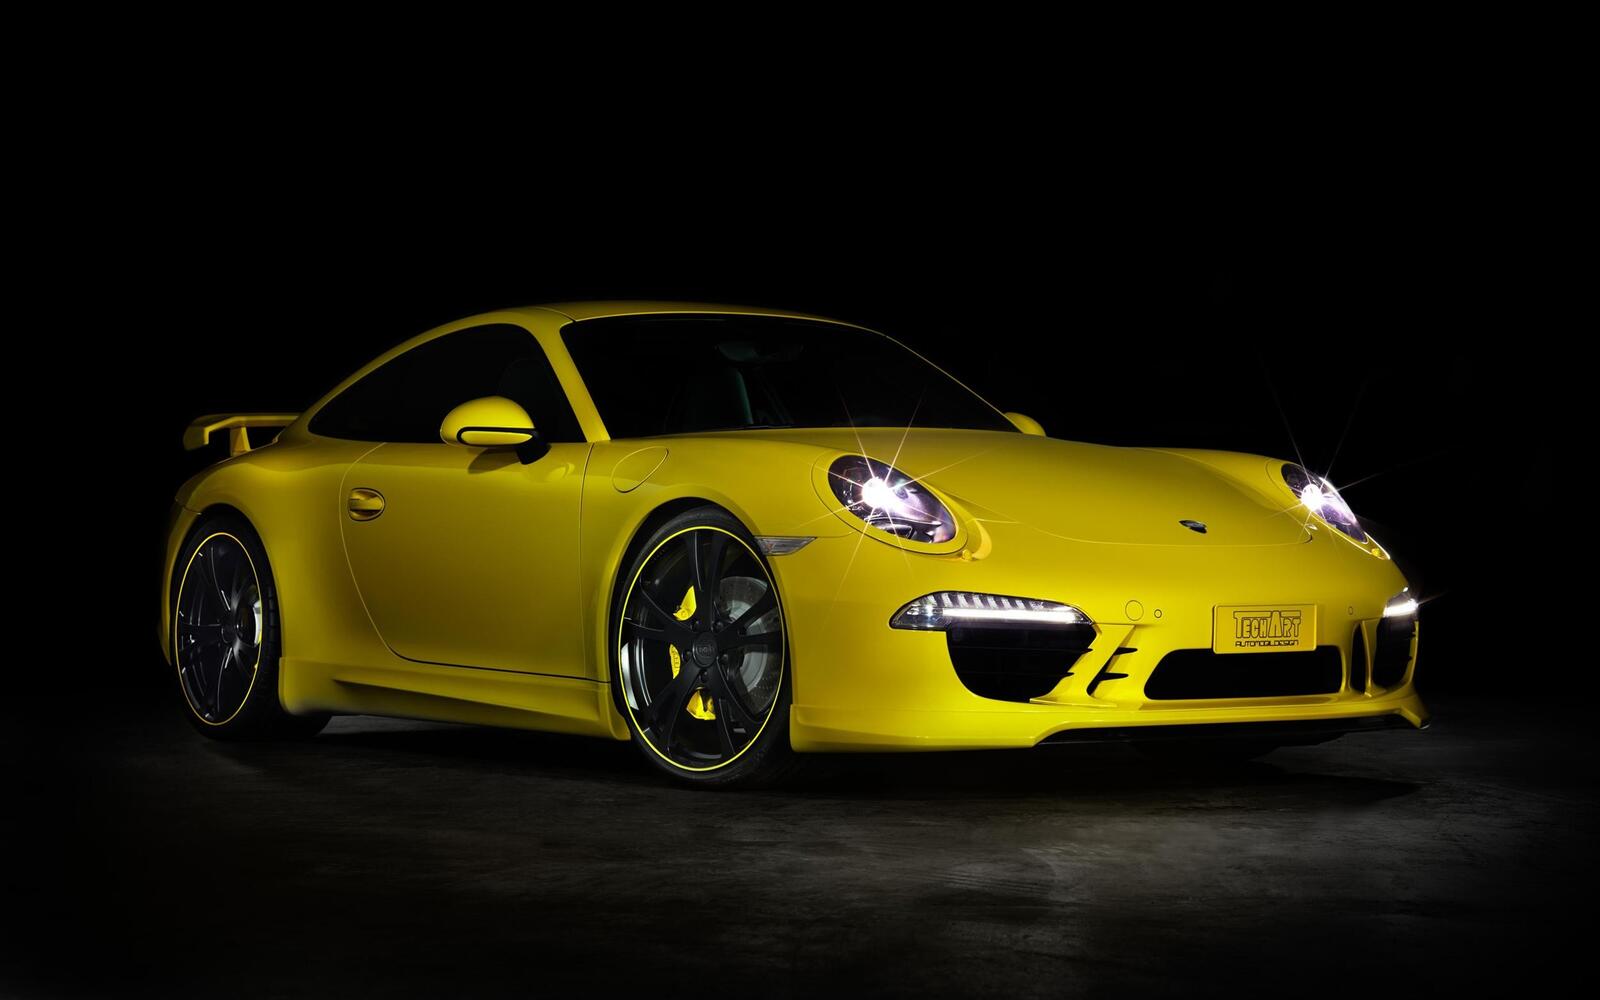 Free photo Cool picture of a yellow porsche 911.